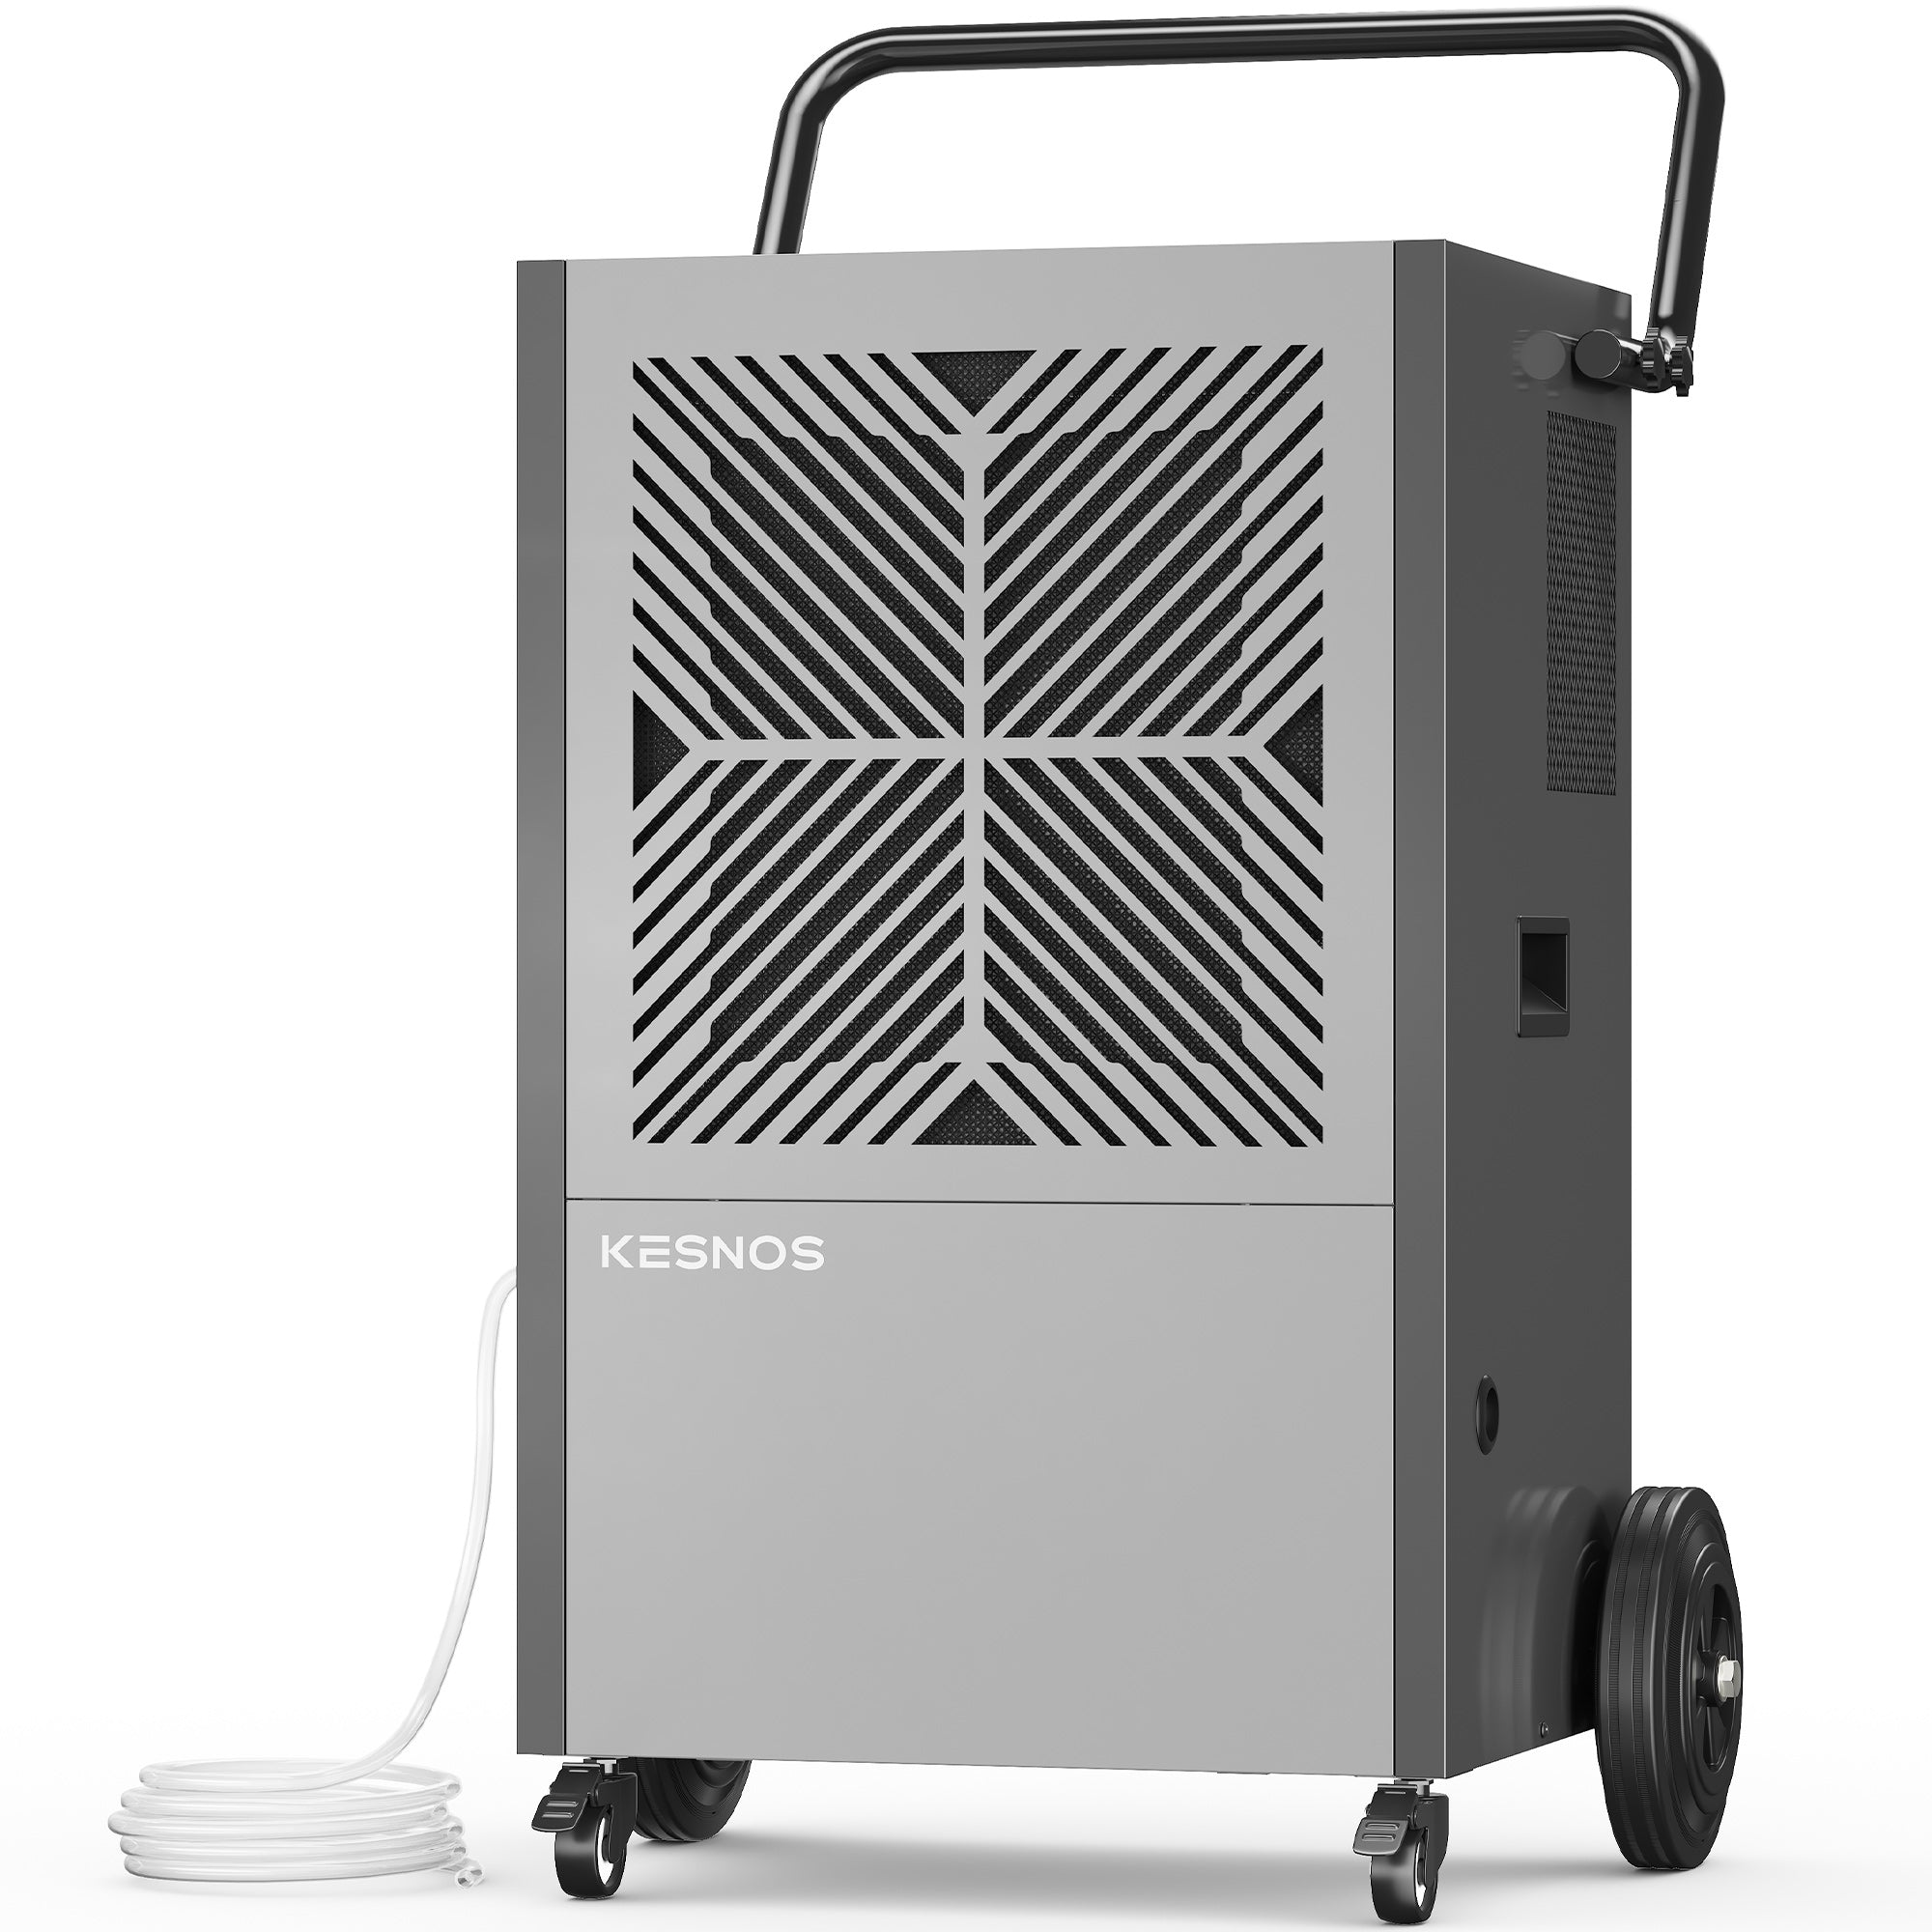 Kesnos 216 Pints Commercial Dehumidifier with Pump – Dehumidifier with Drain Hose and 24 Hr Timer for Large Space Up to 8500 Sq. Ft. – Ideal for Basements, Industrial Spaces and Job Sites (Model: DP902A)